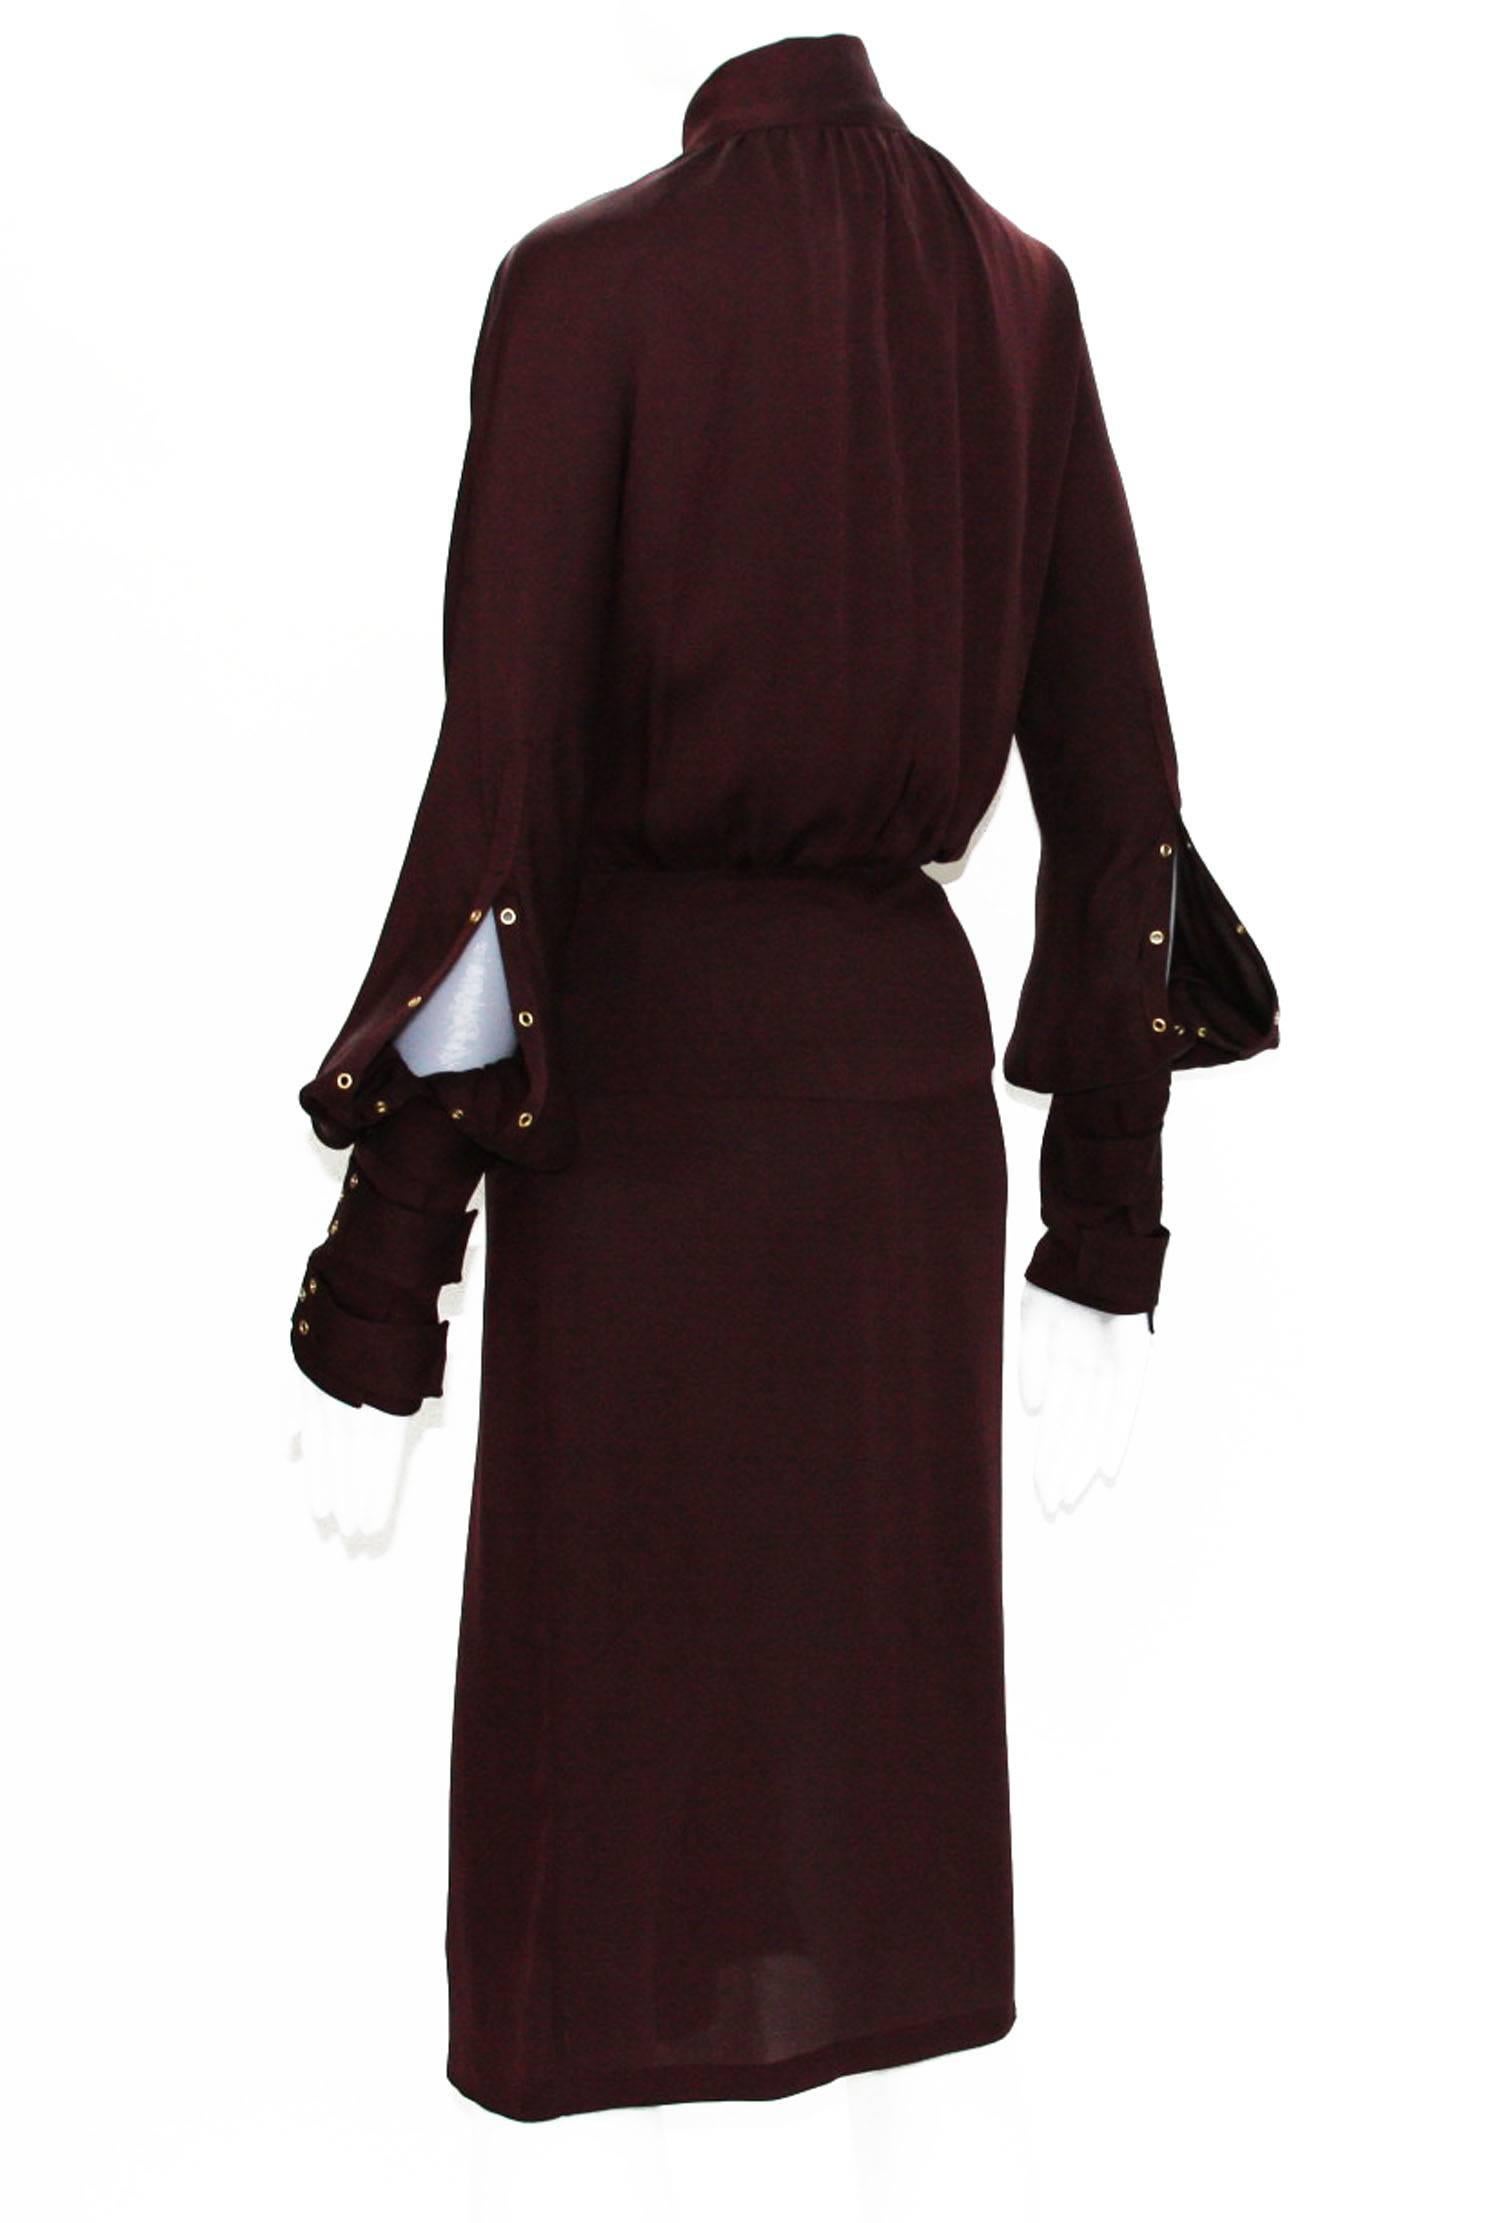 Tom Ford for Gucci 2003 Collection 3x Buckle Grommet Sleeve Burgundy Dress 40 -  In Excellent Condition For Sale In Montgomery, TX